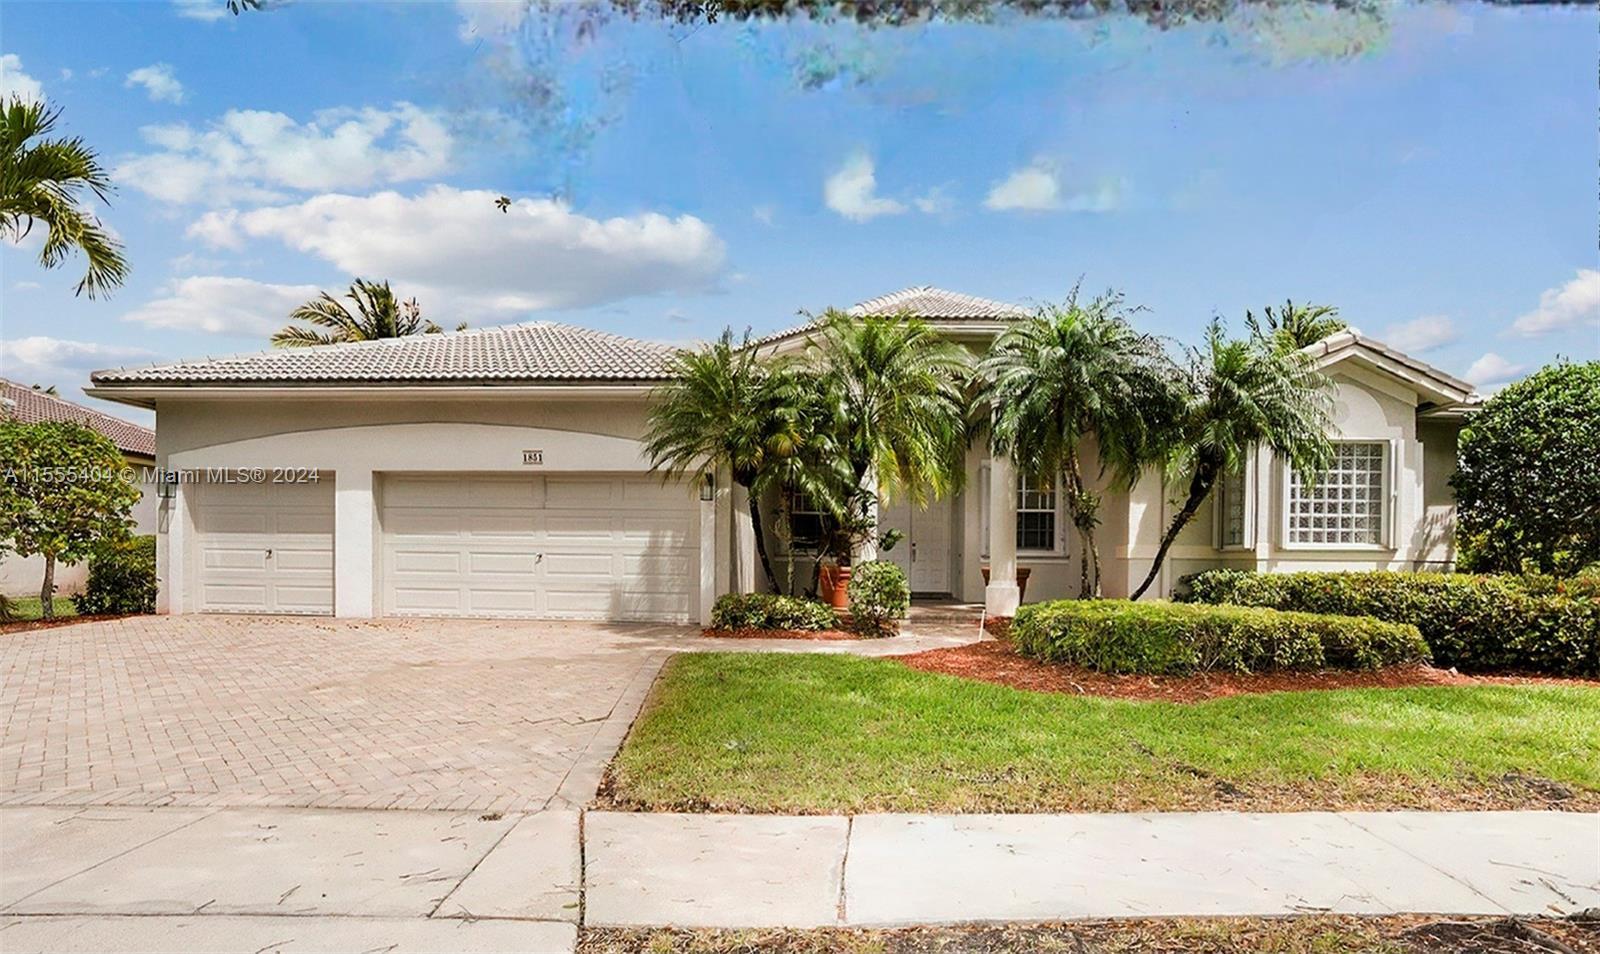 Photo of 1851 NW 167th Ave in Pembroke Pines, FL